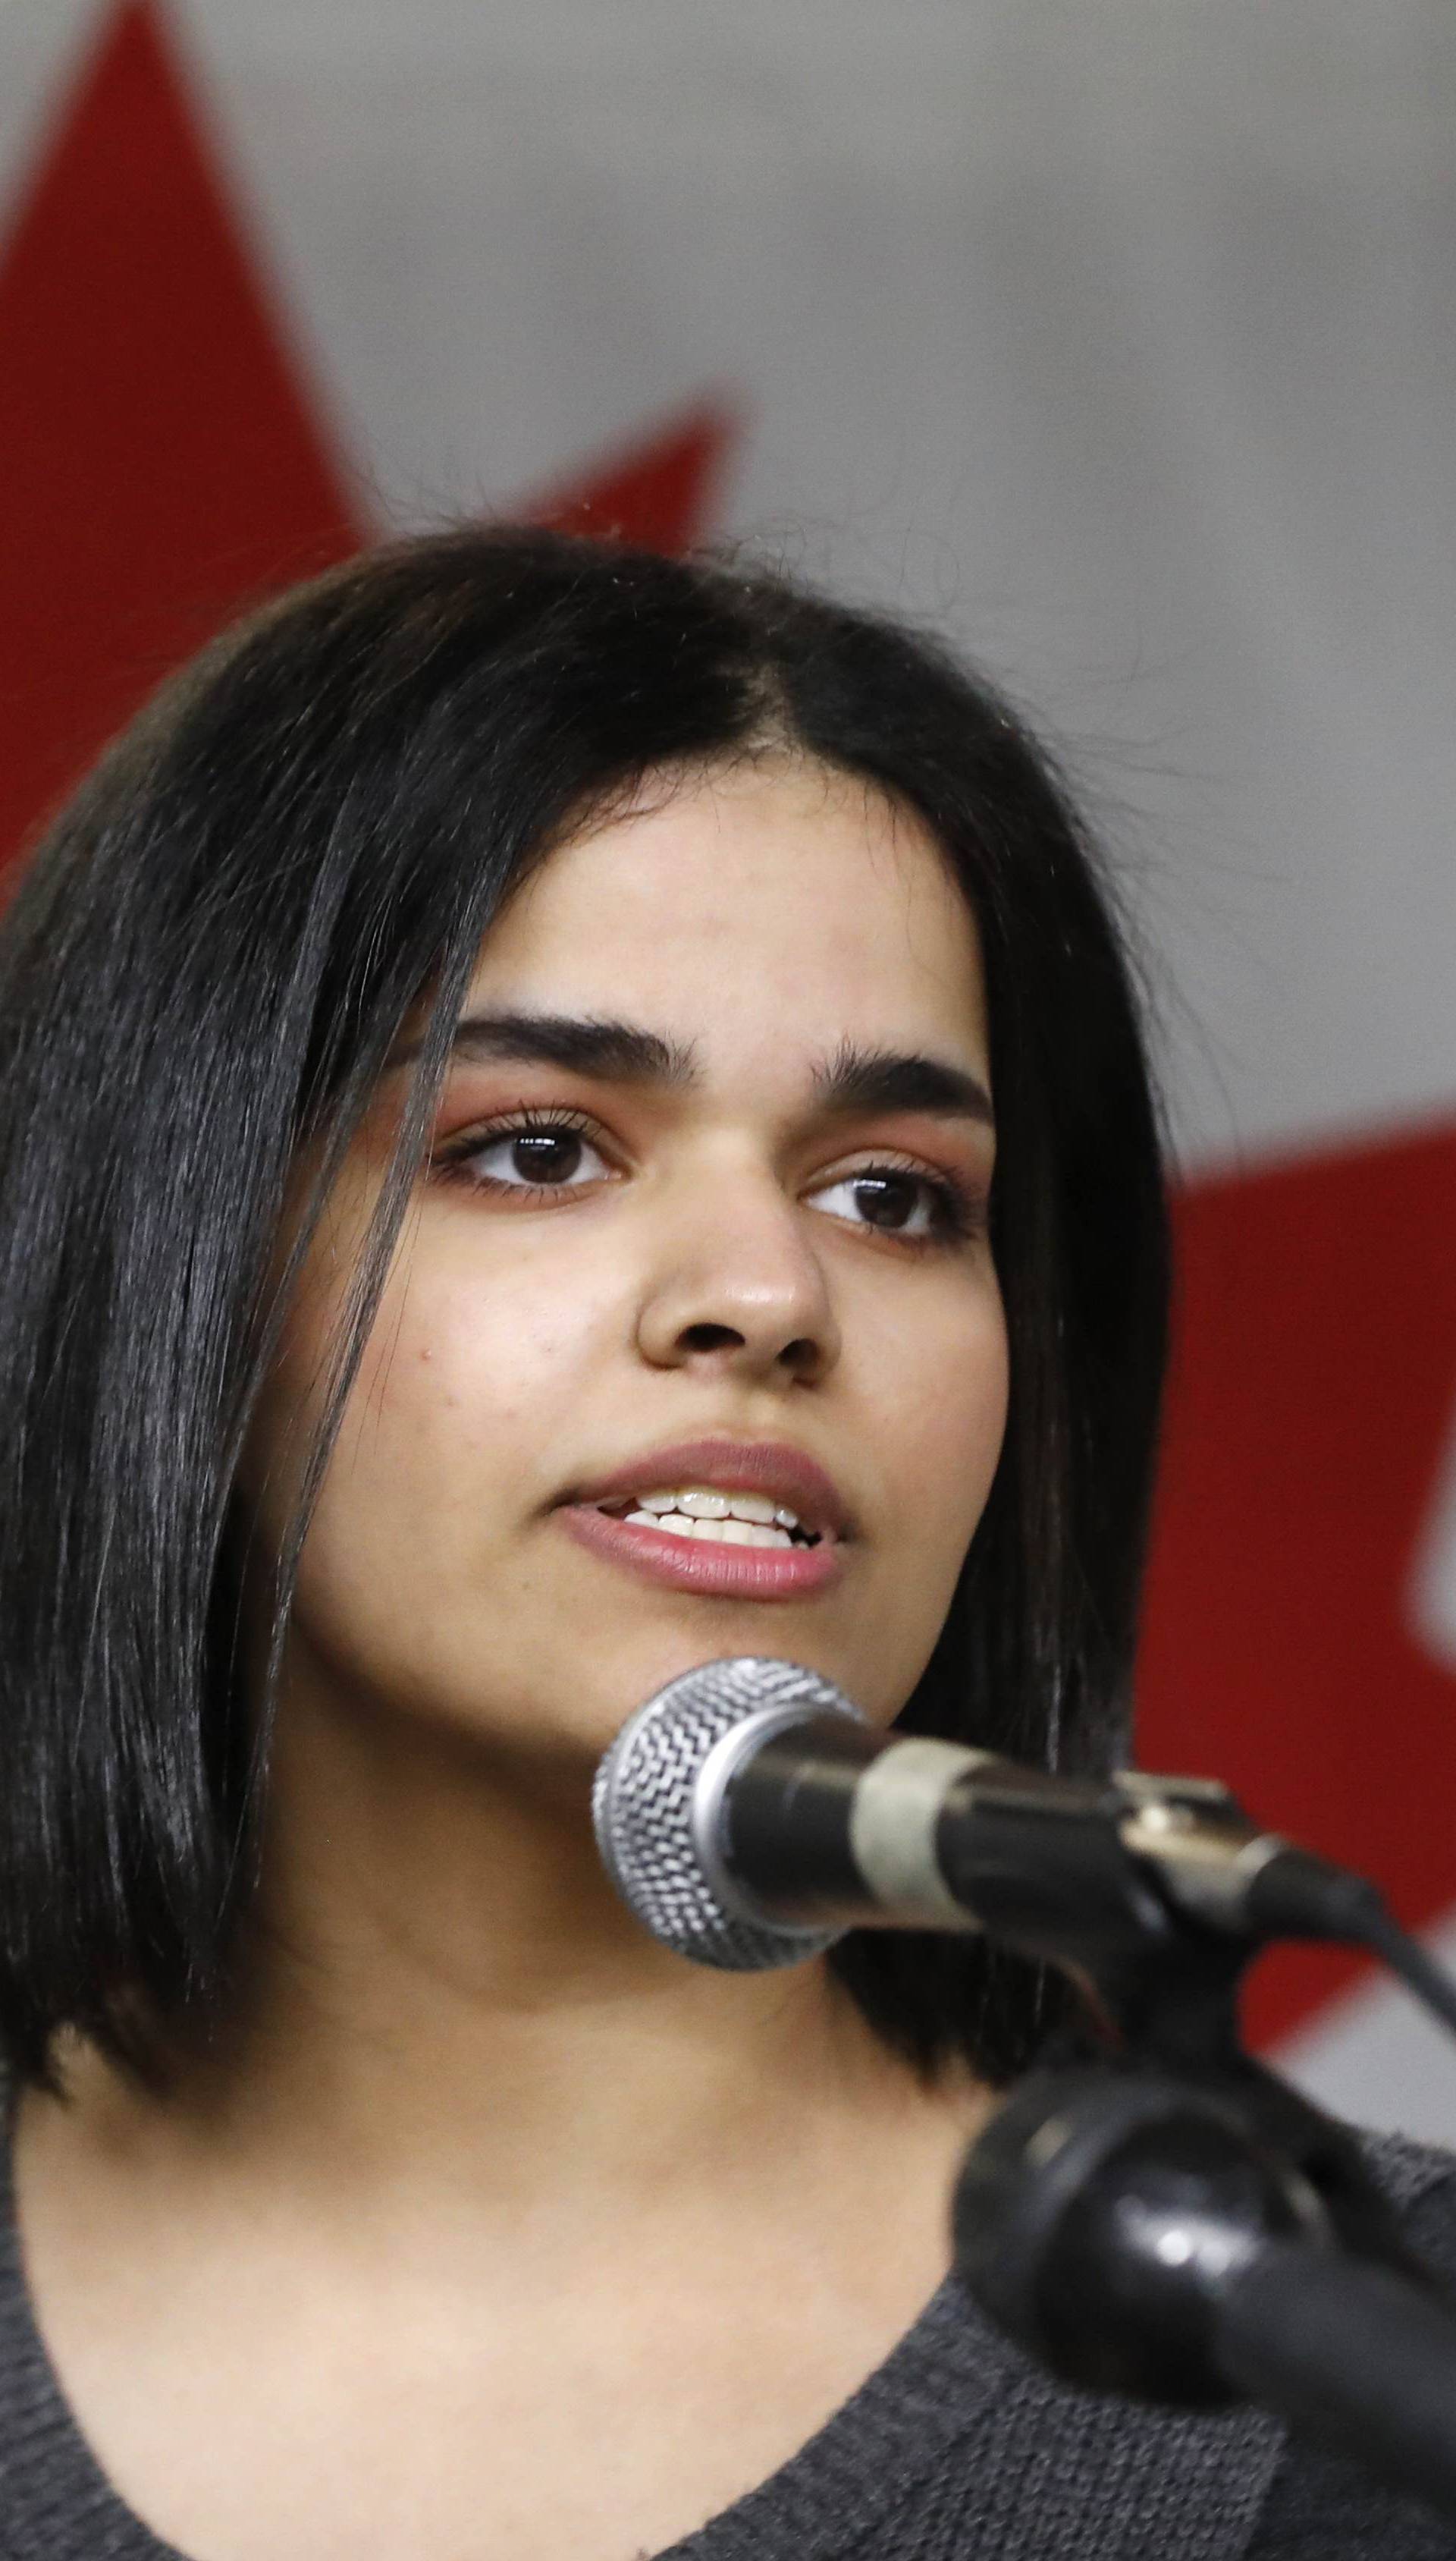 Rahaf Mohammed al-Qunun, an 18-year-old Saudi woman who fled her family, speaks in Toronto